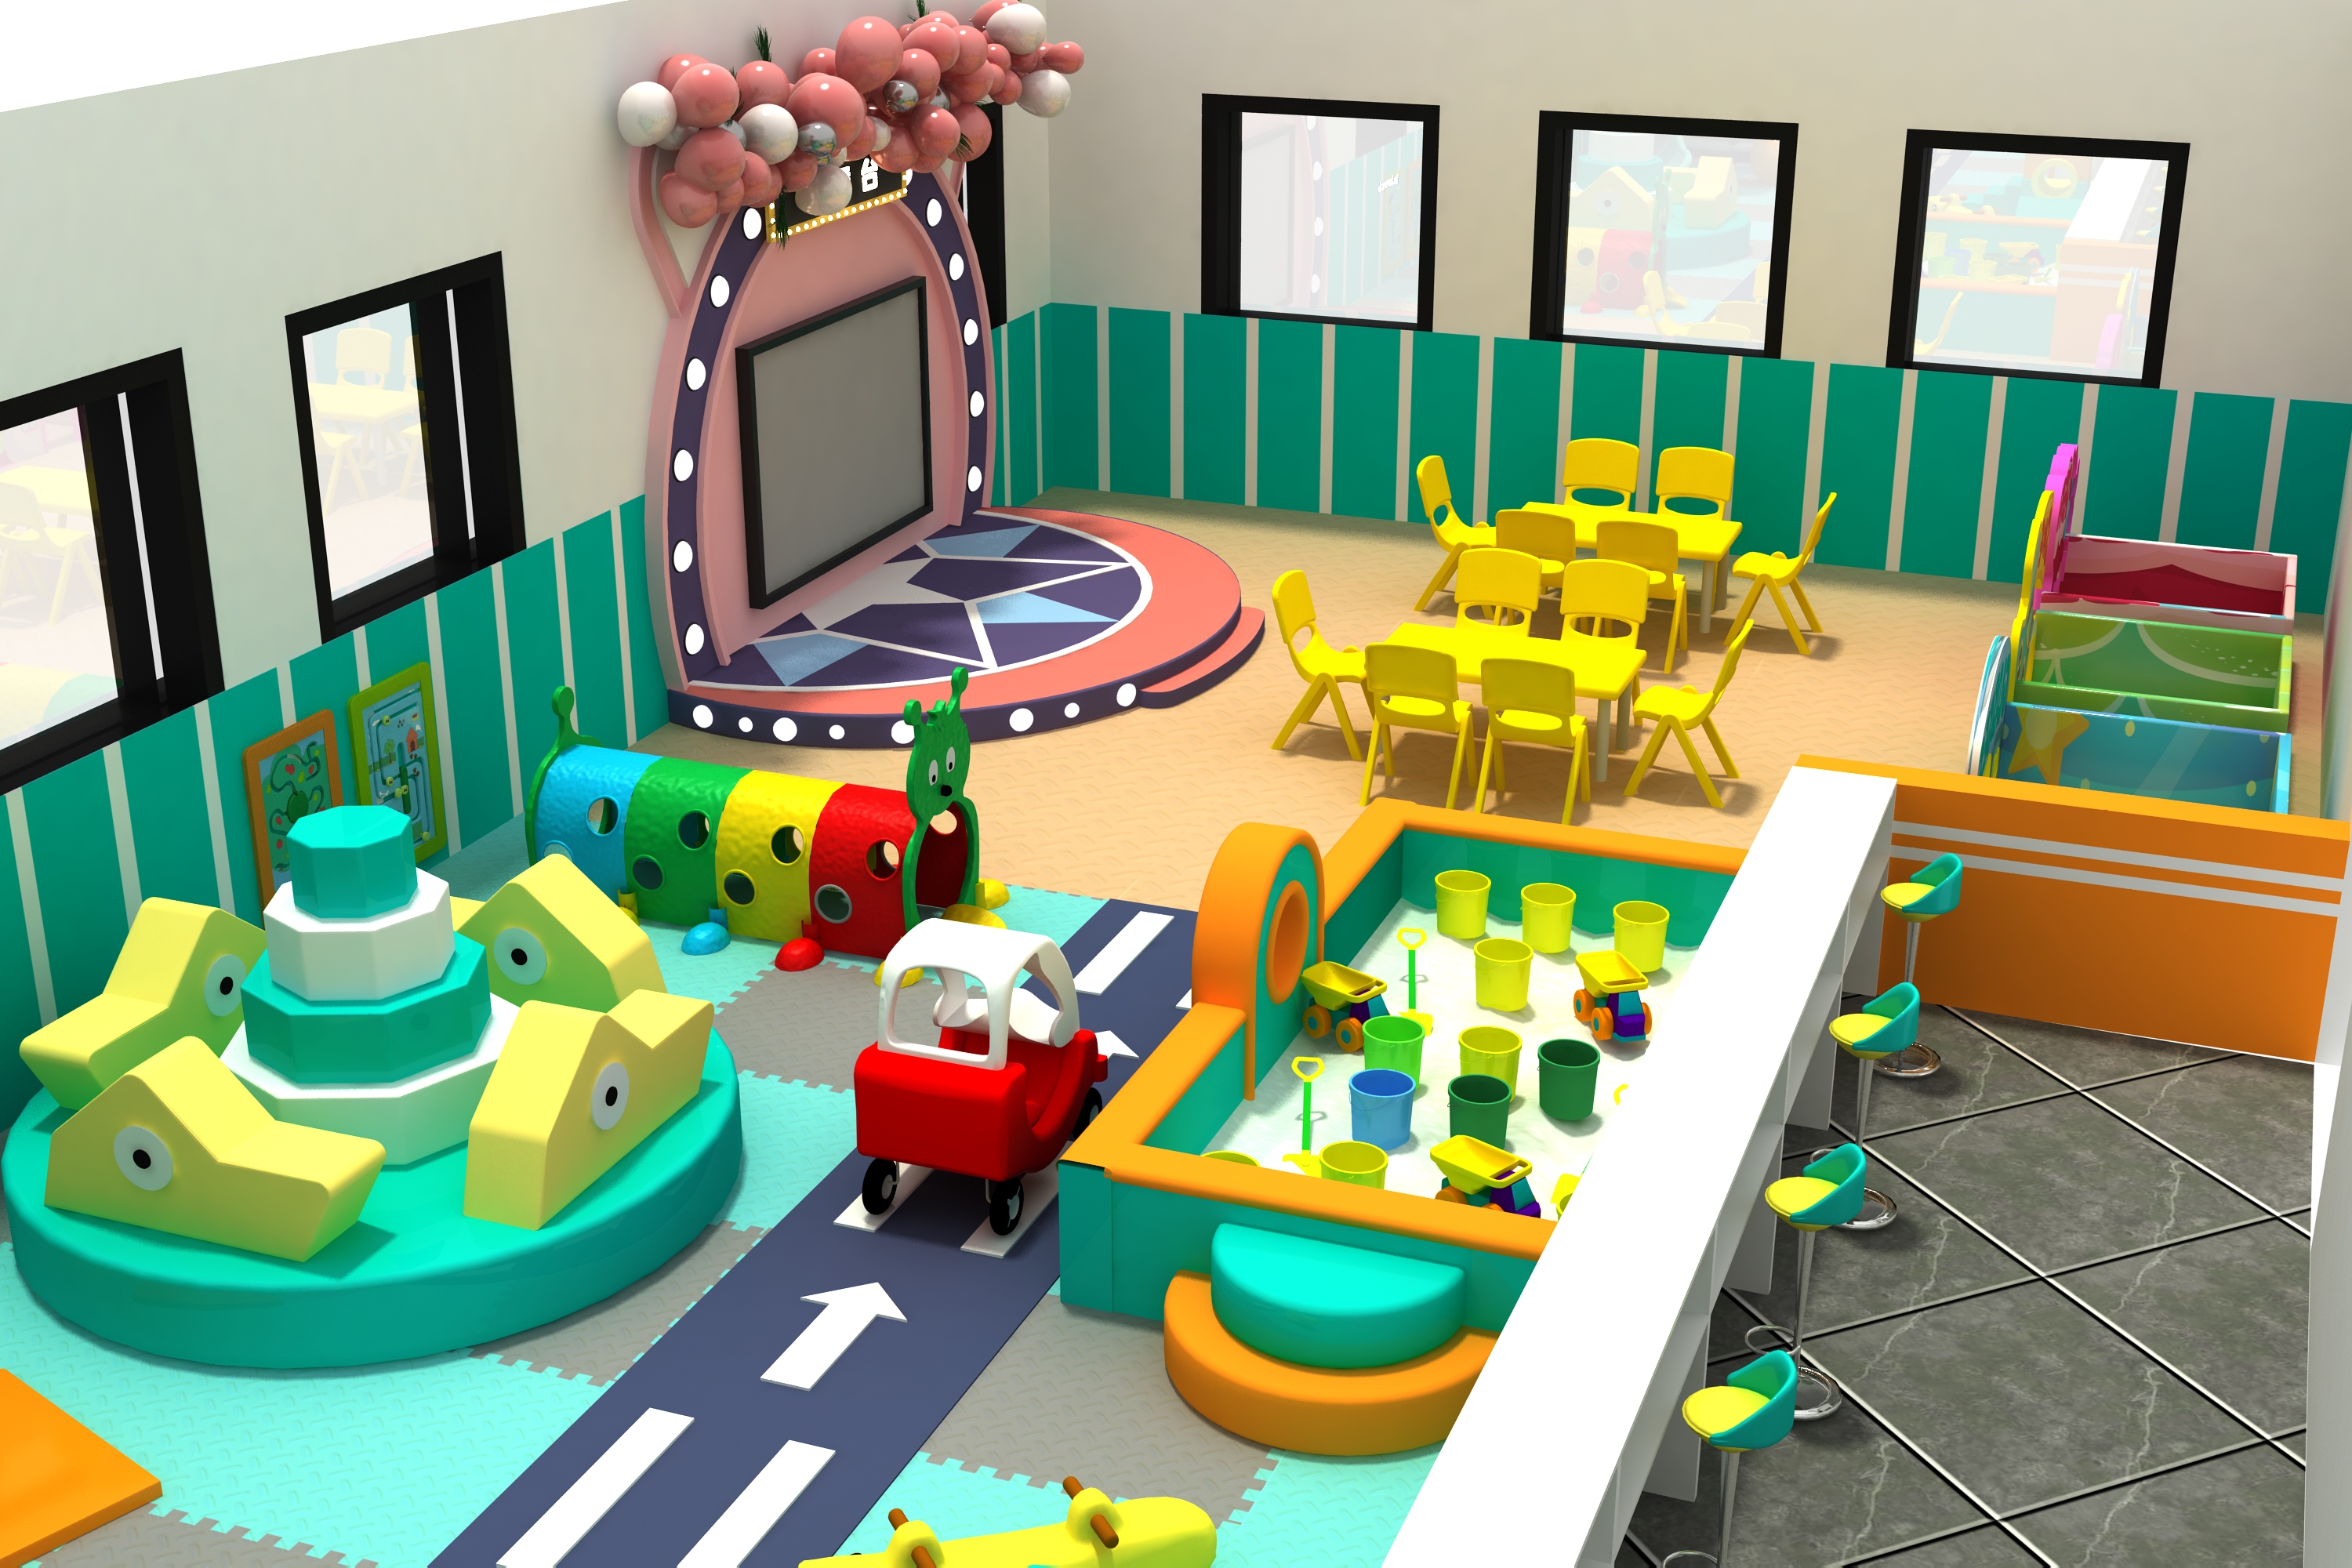 How to use indoor soft playground?